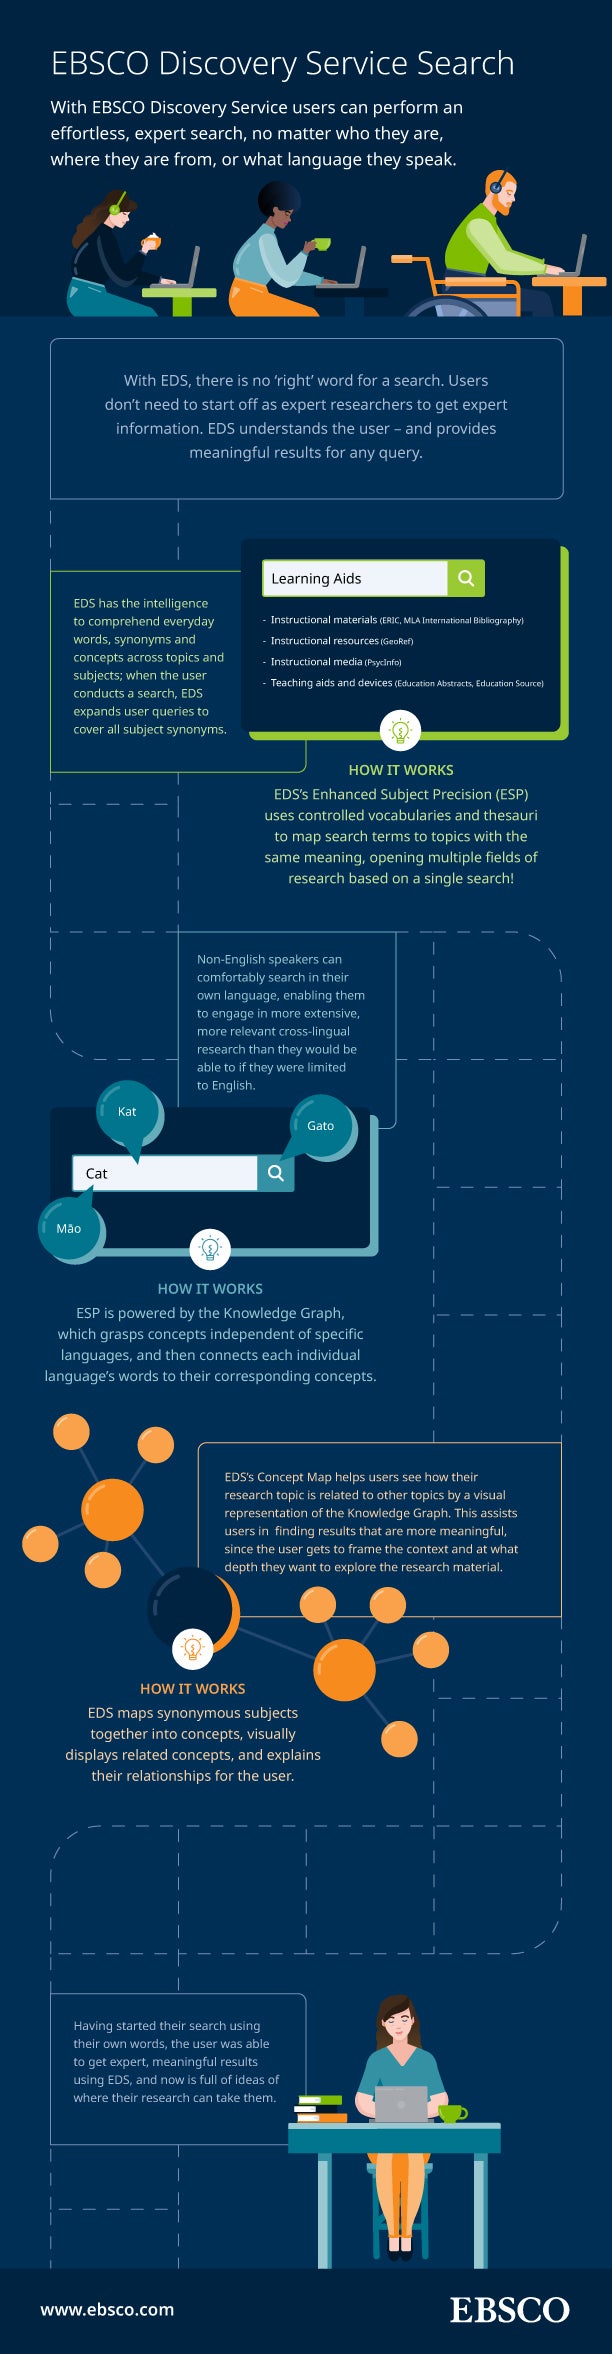 EBSCO Discovery Service Search Technology Infographic   